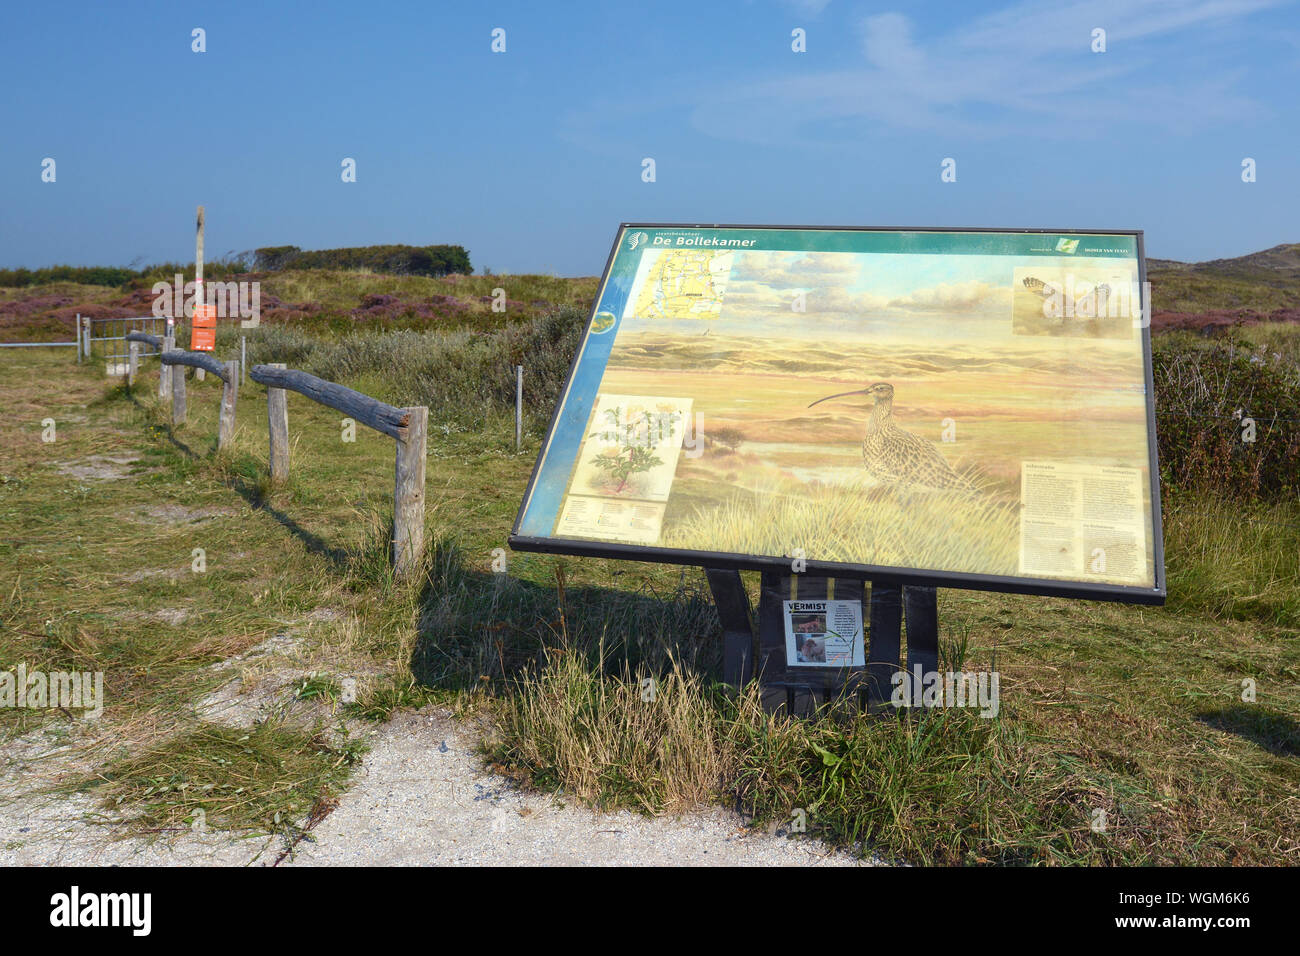 Texel / North Netherlands - August 2019: Entrance with information board to nature reserve `De Bollekamer`on island Texel in Holland Stock Photo